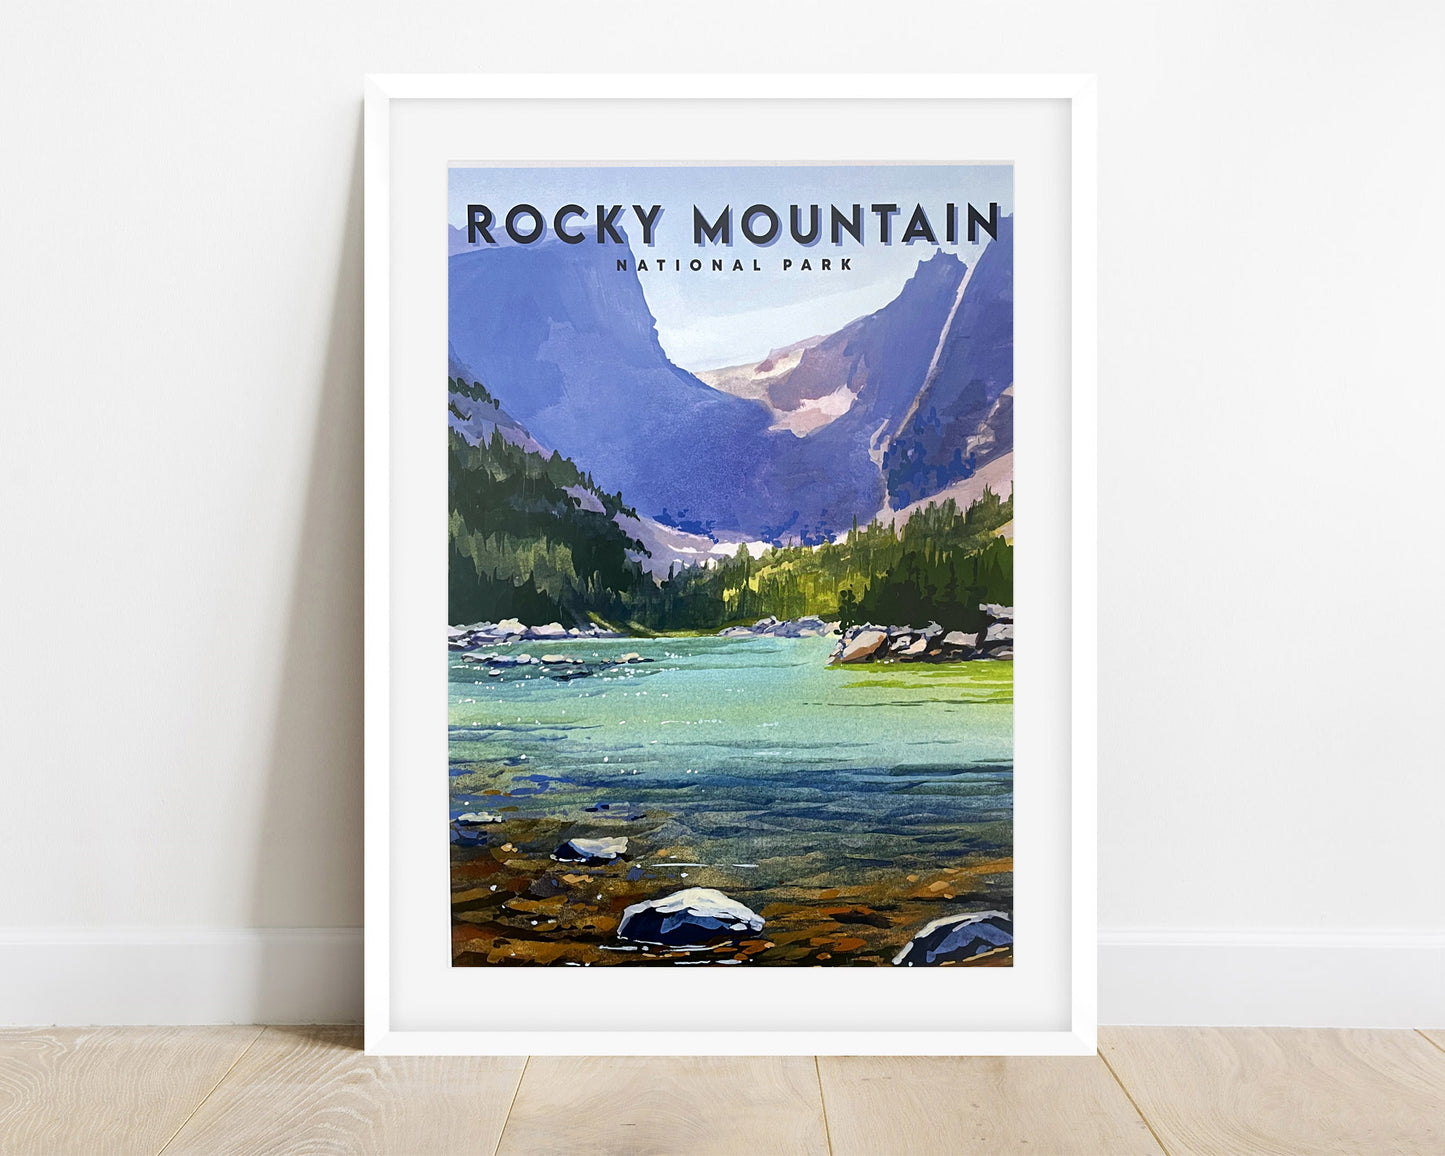 'Rocky Mountain' National Park Travel Poster